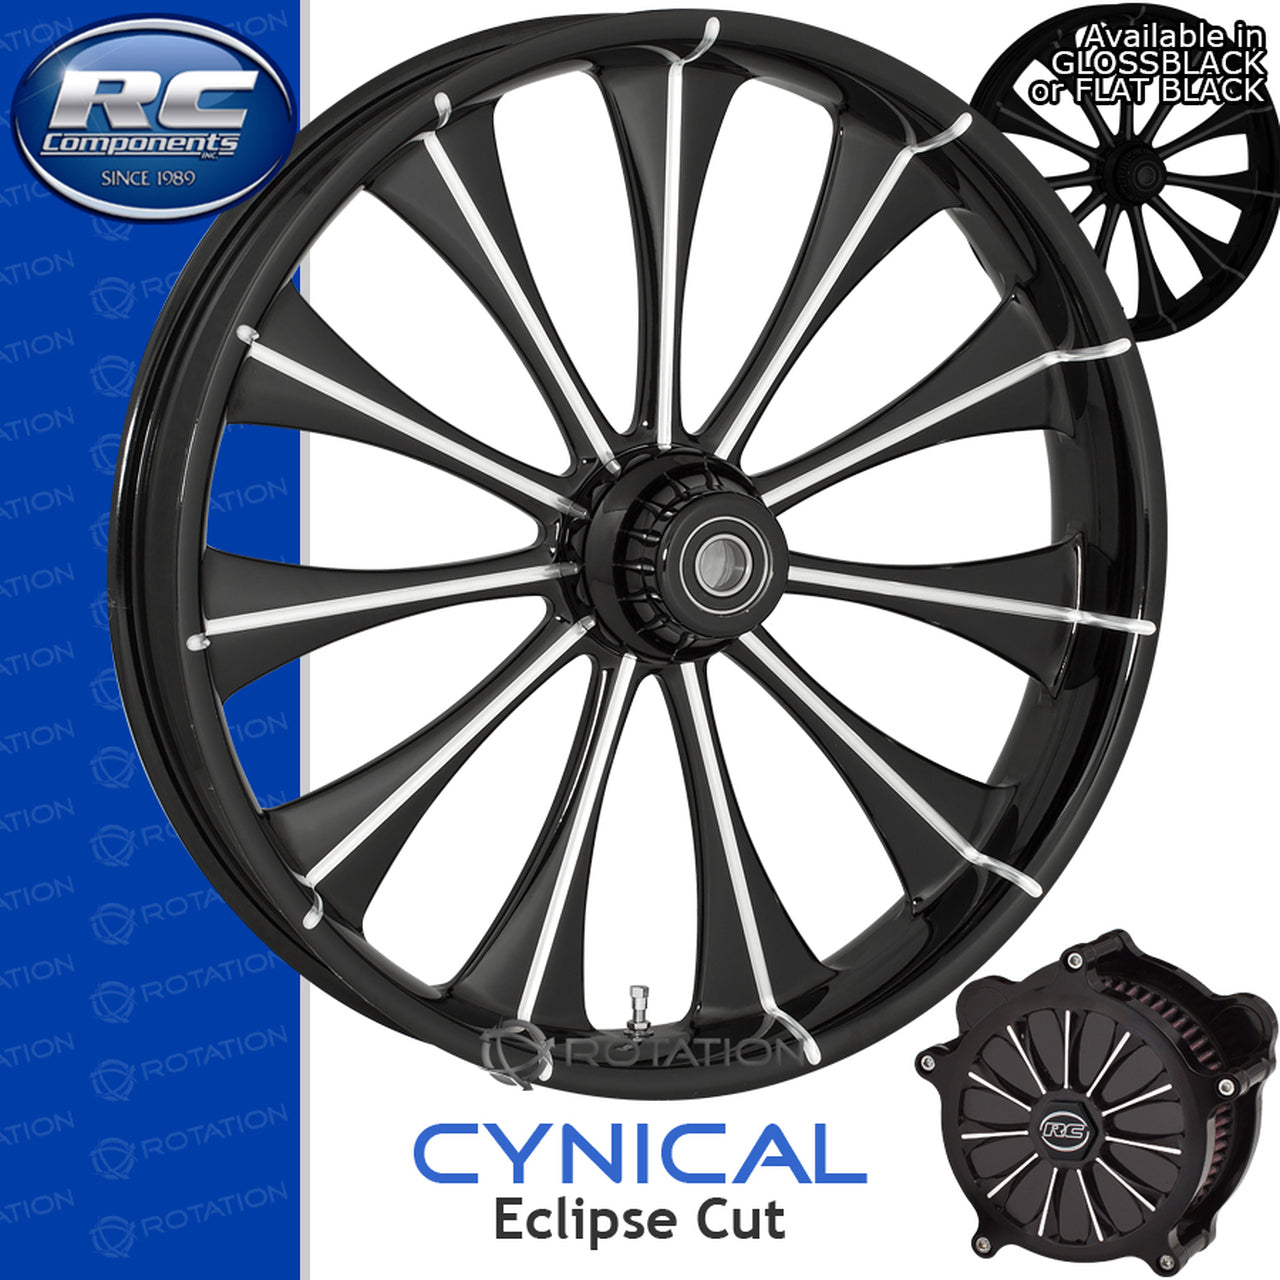 RC Components Cynical Eclipse Touring Wheel